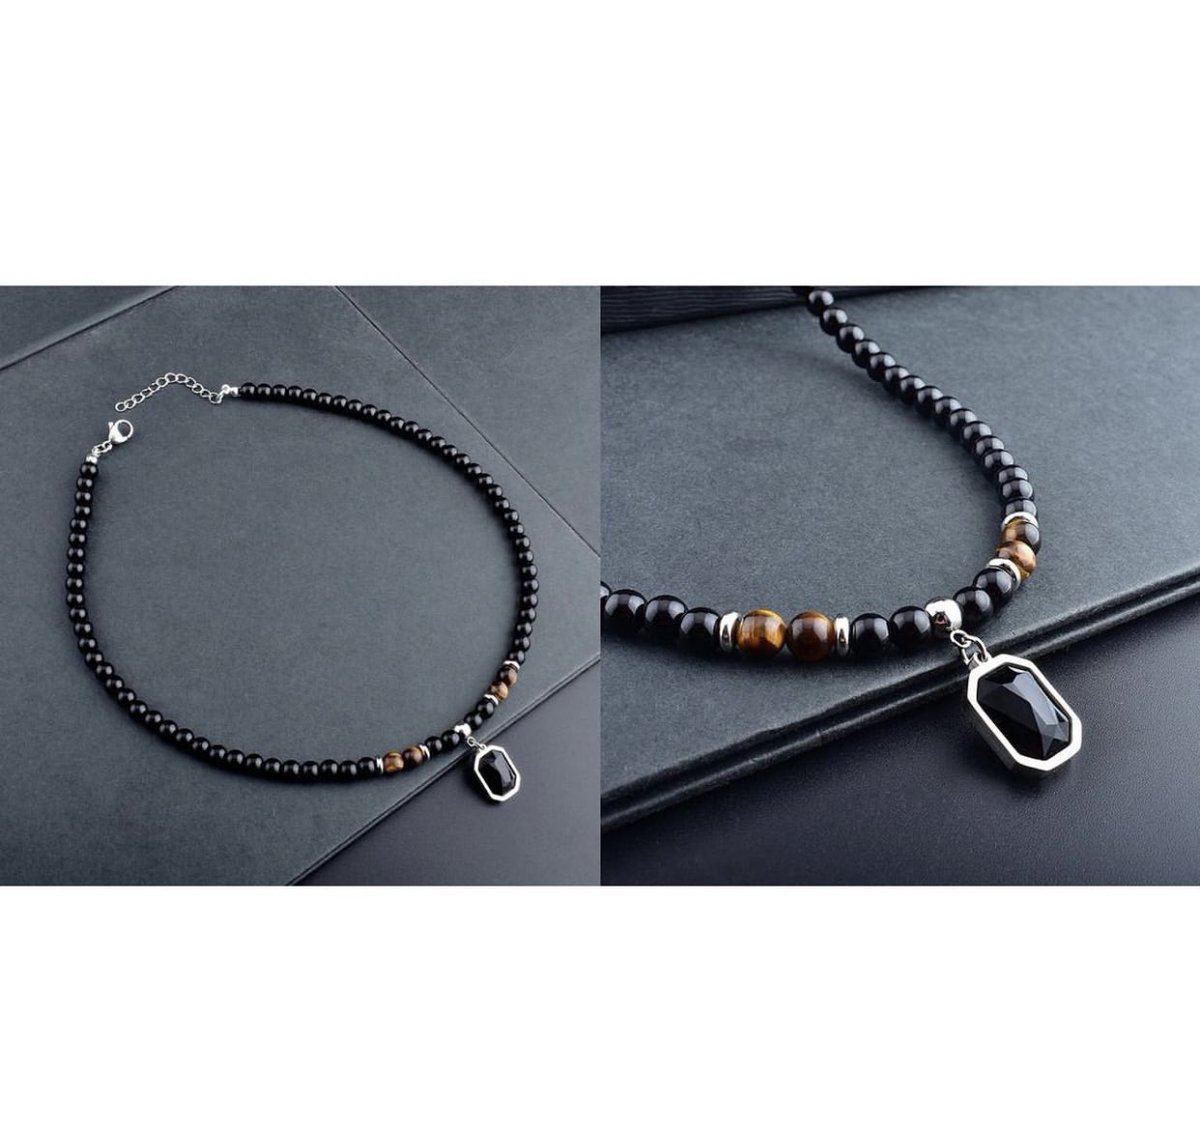 Bead necklace.

Price : N10,000